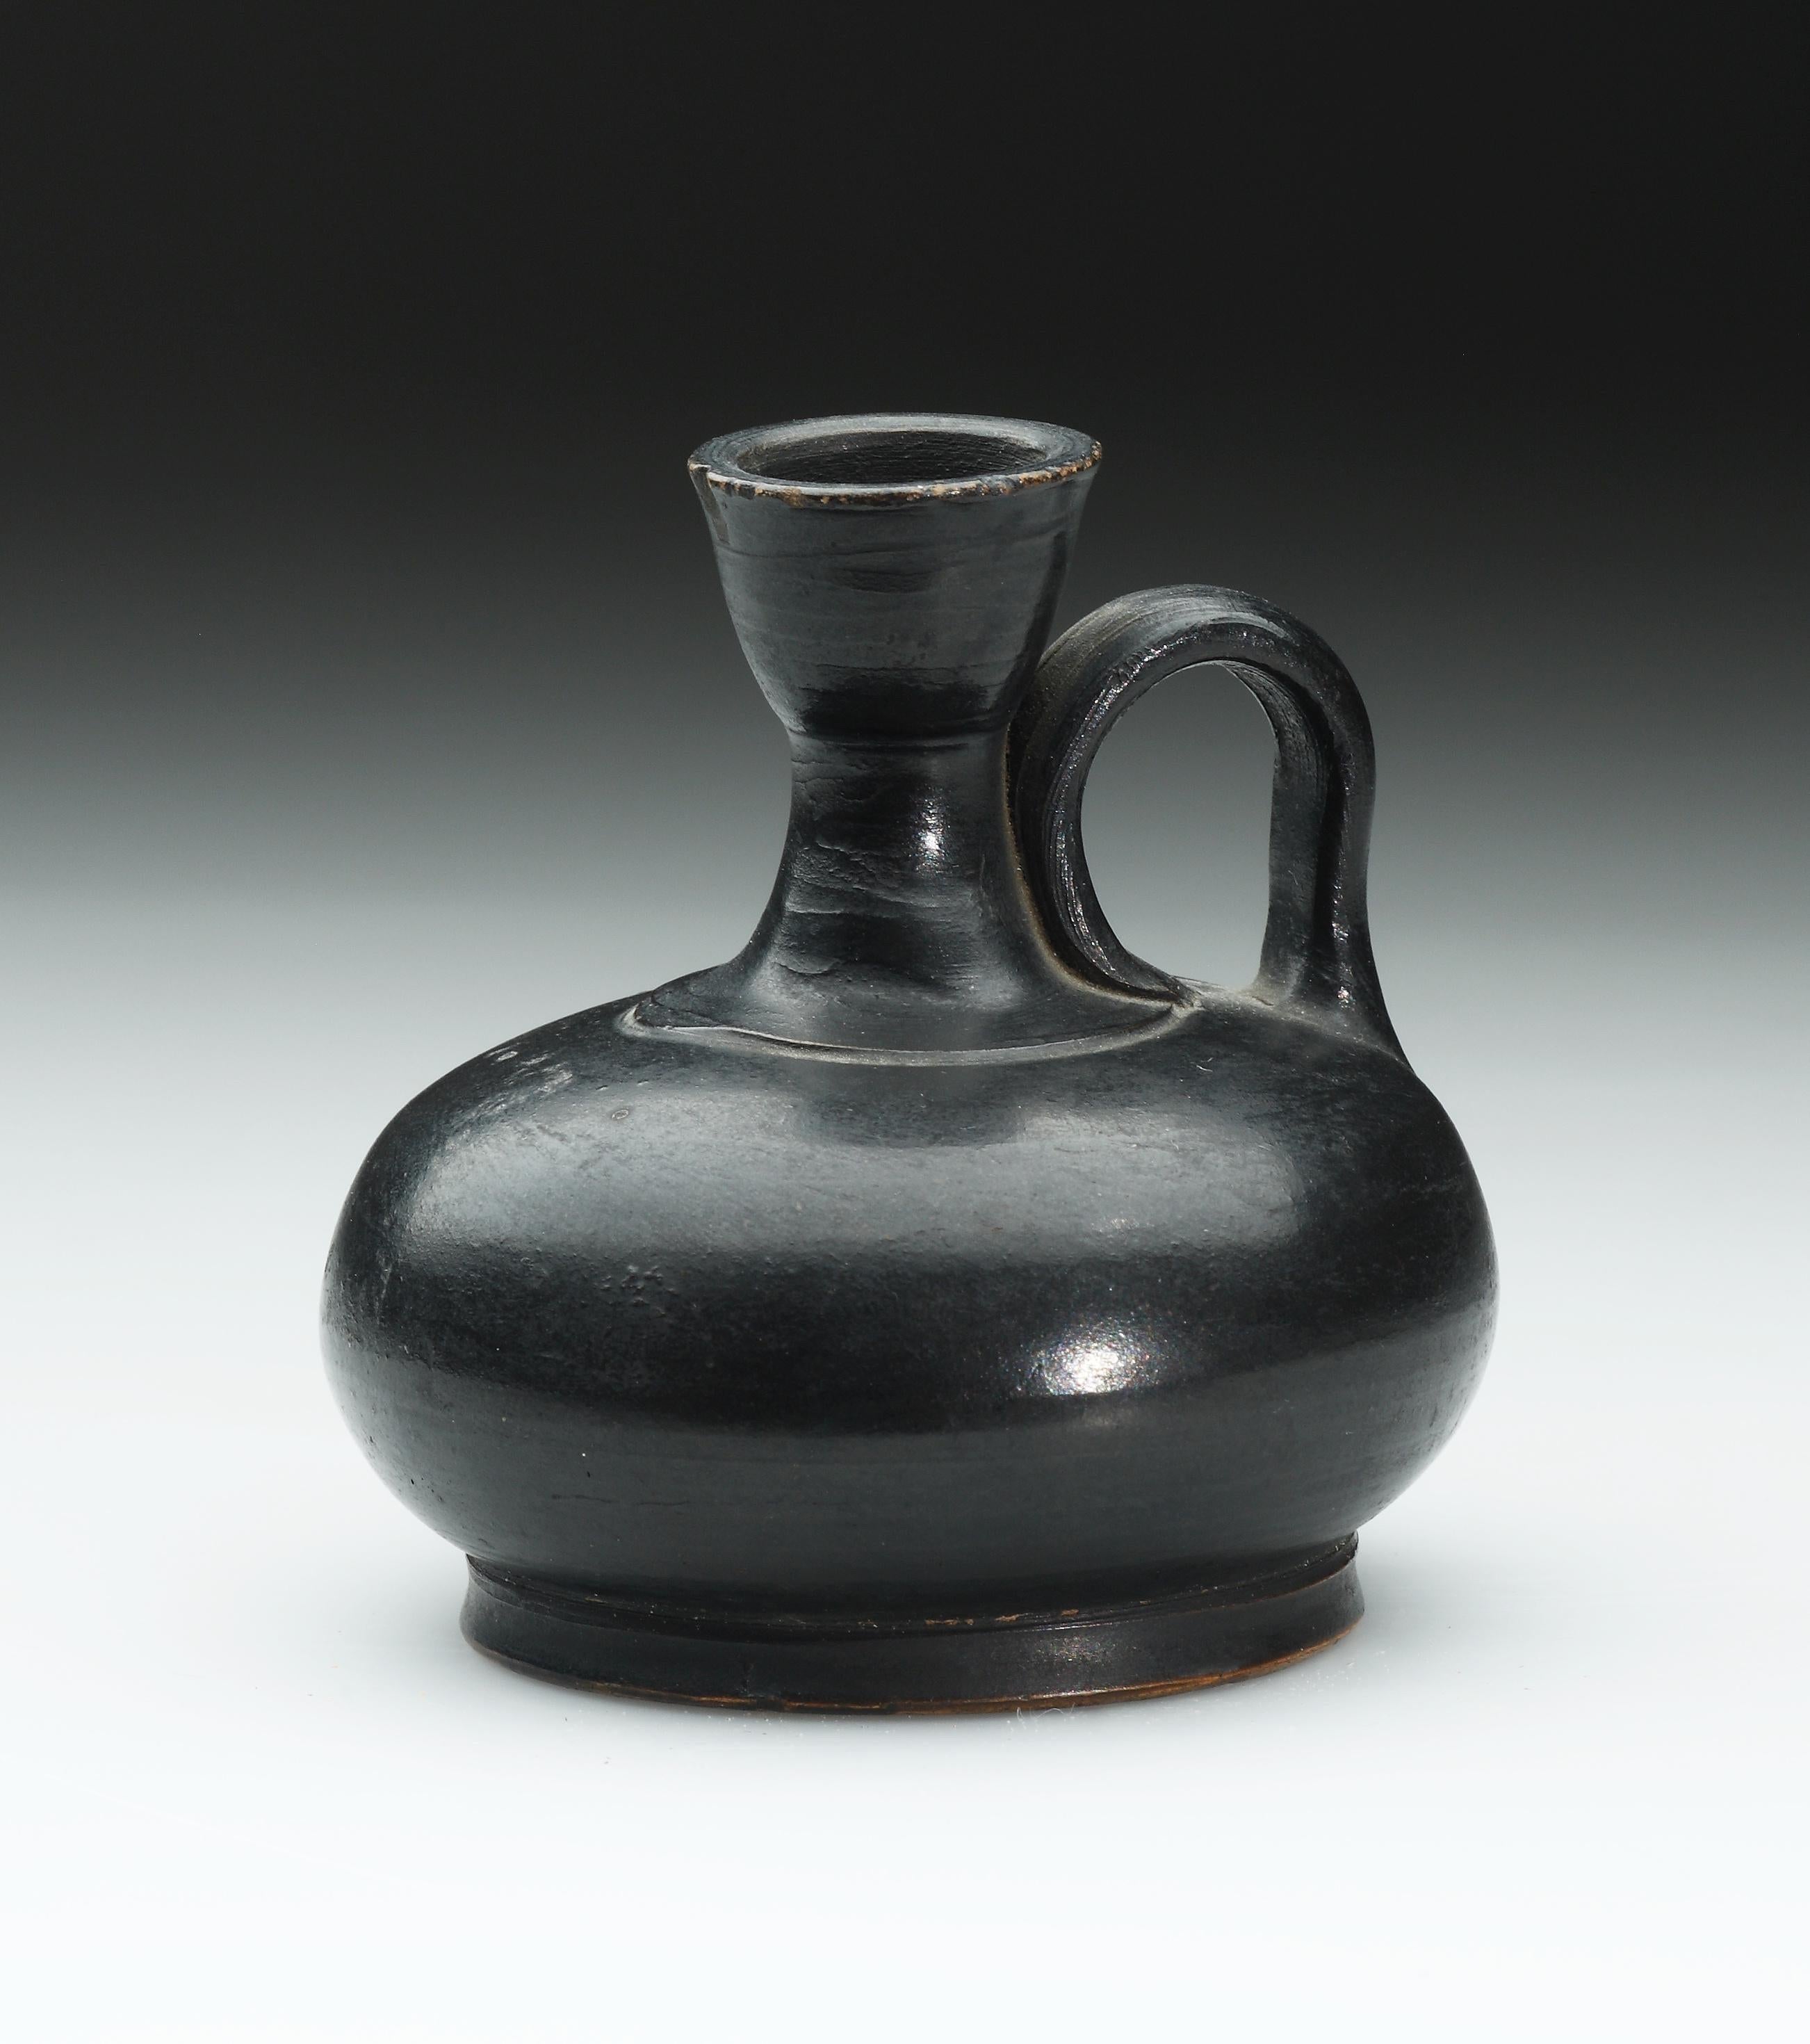 Attic second half of the 5th century B.C

Clay, black glaze. Measures: H. 7.8 cm

A squat, globular vessel on a low ring foot, with funnel-shaped mouth, and a single high-slung handle attached to short neck and shoulder. Offset at join of neck